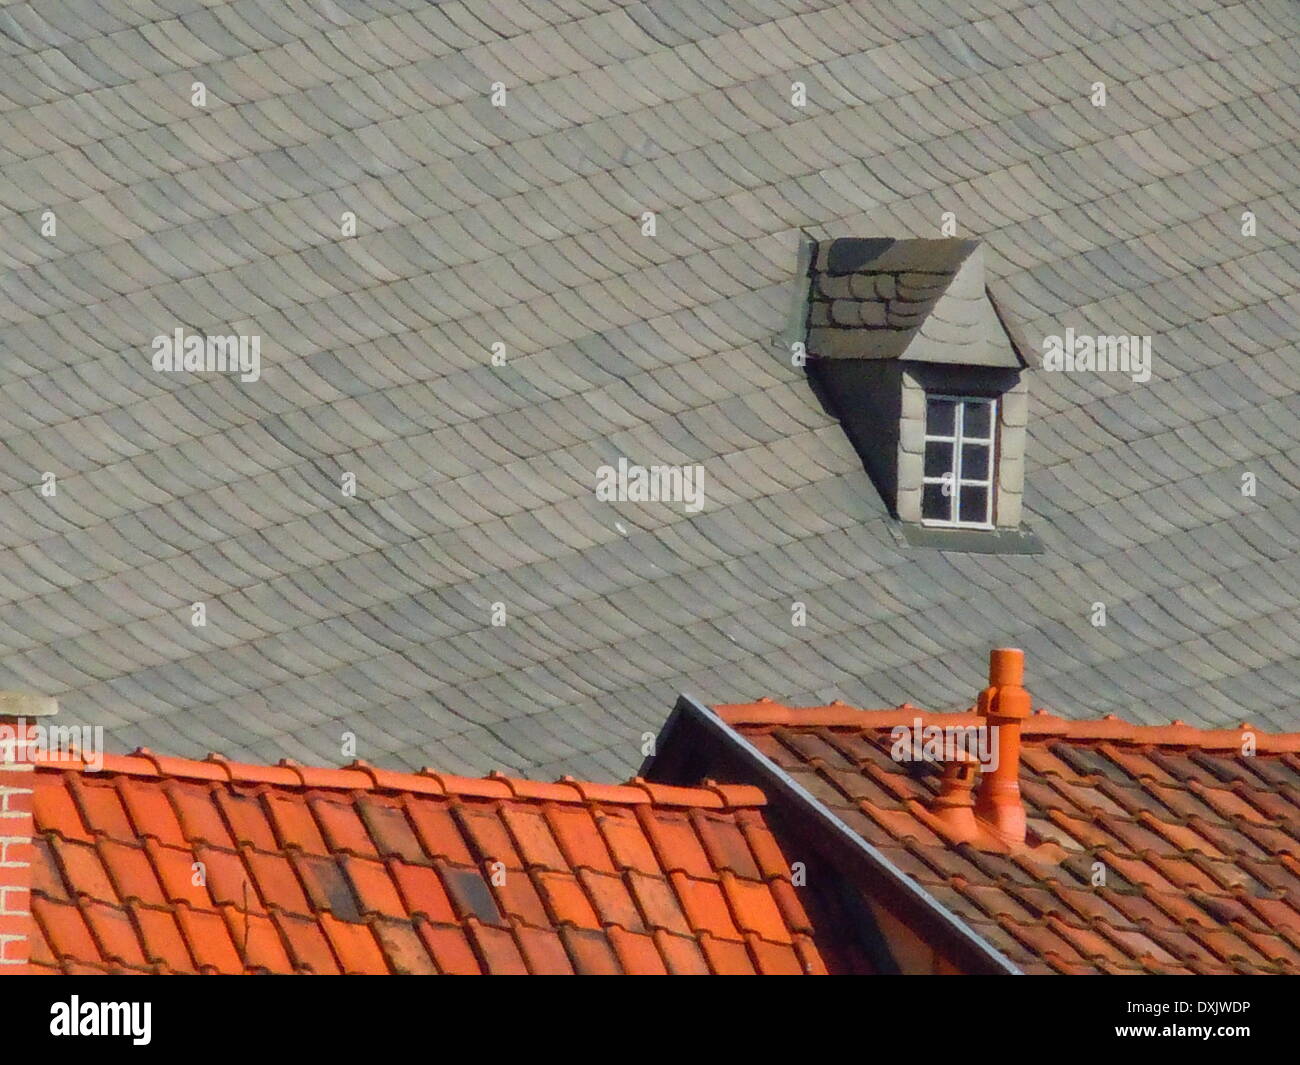 slate roof and tile roof in Quedlinburg, 13 March 2014. Stock Photo